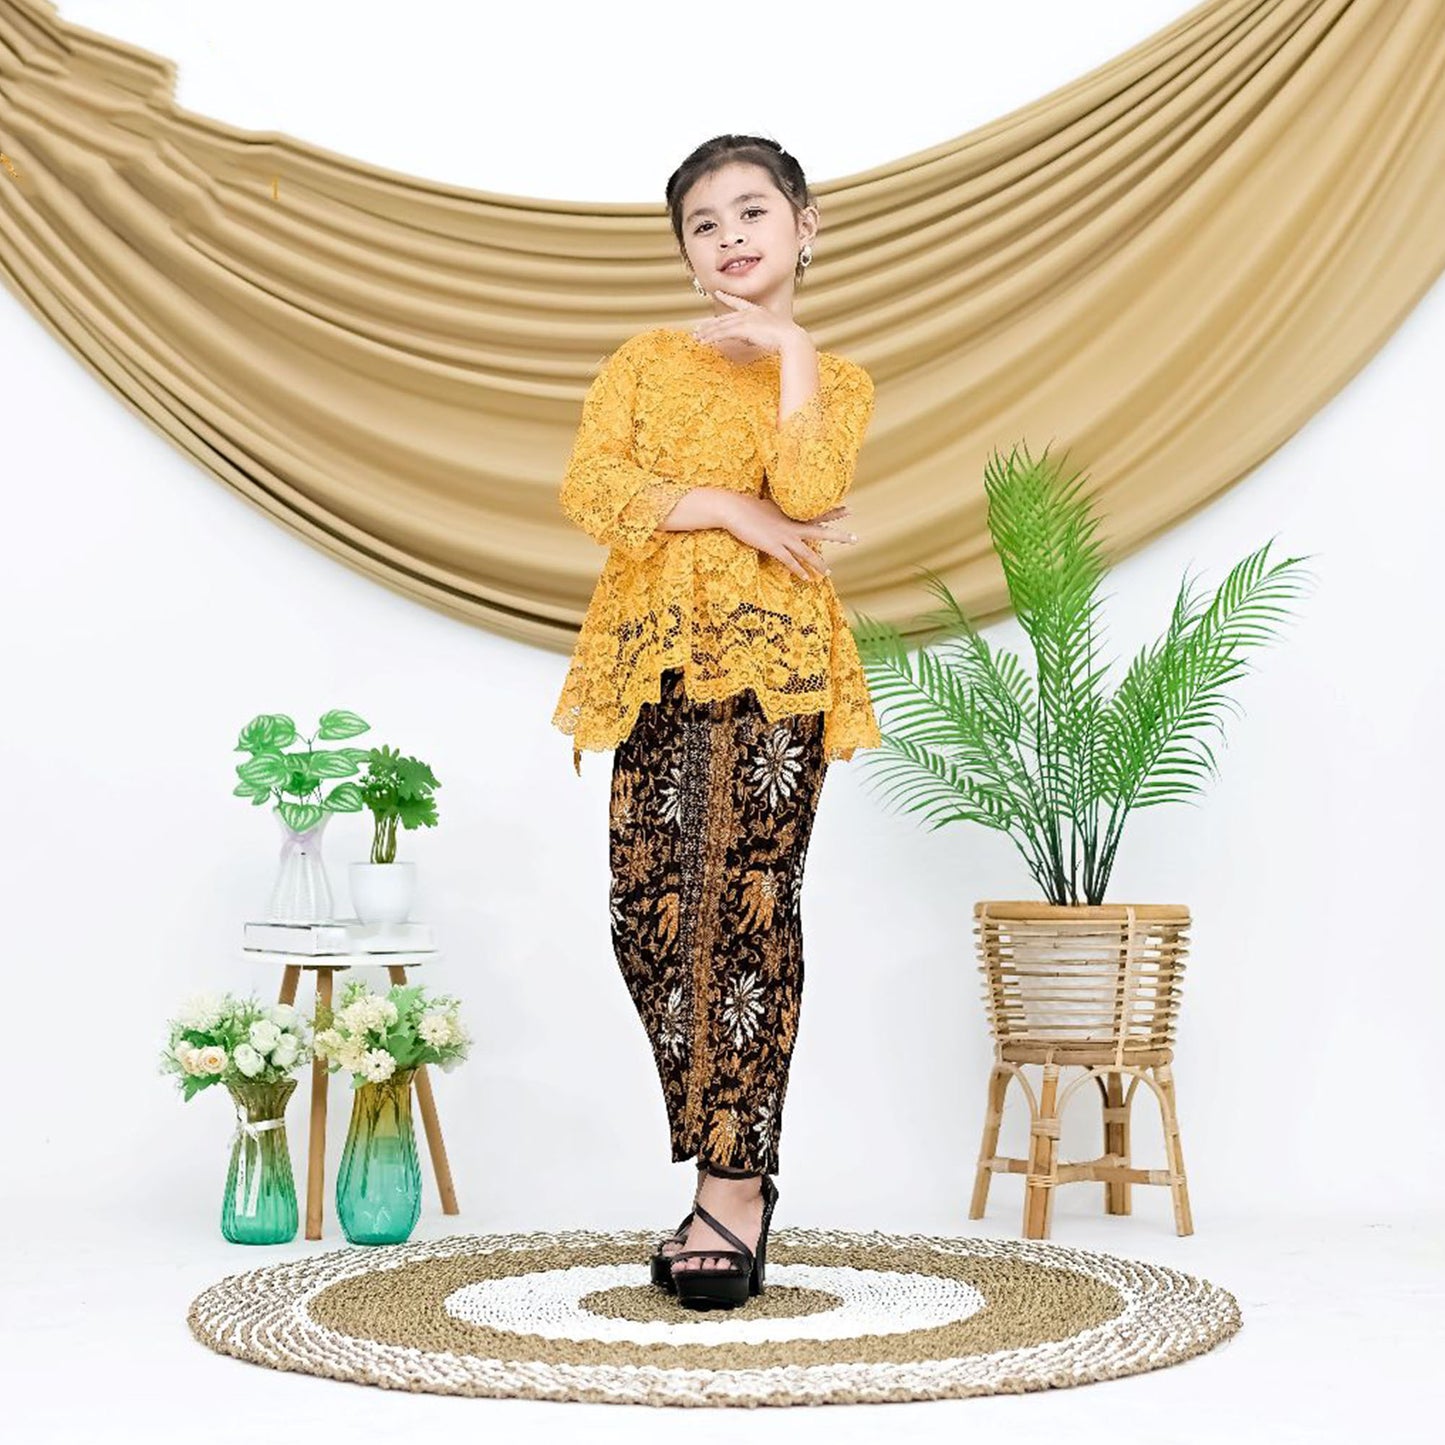 Children's Kebaya Suit Made Of Brocade Material Elegance And Charm For Young Fashionistas